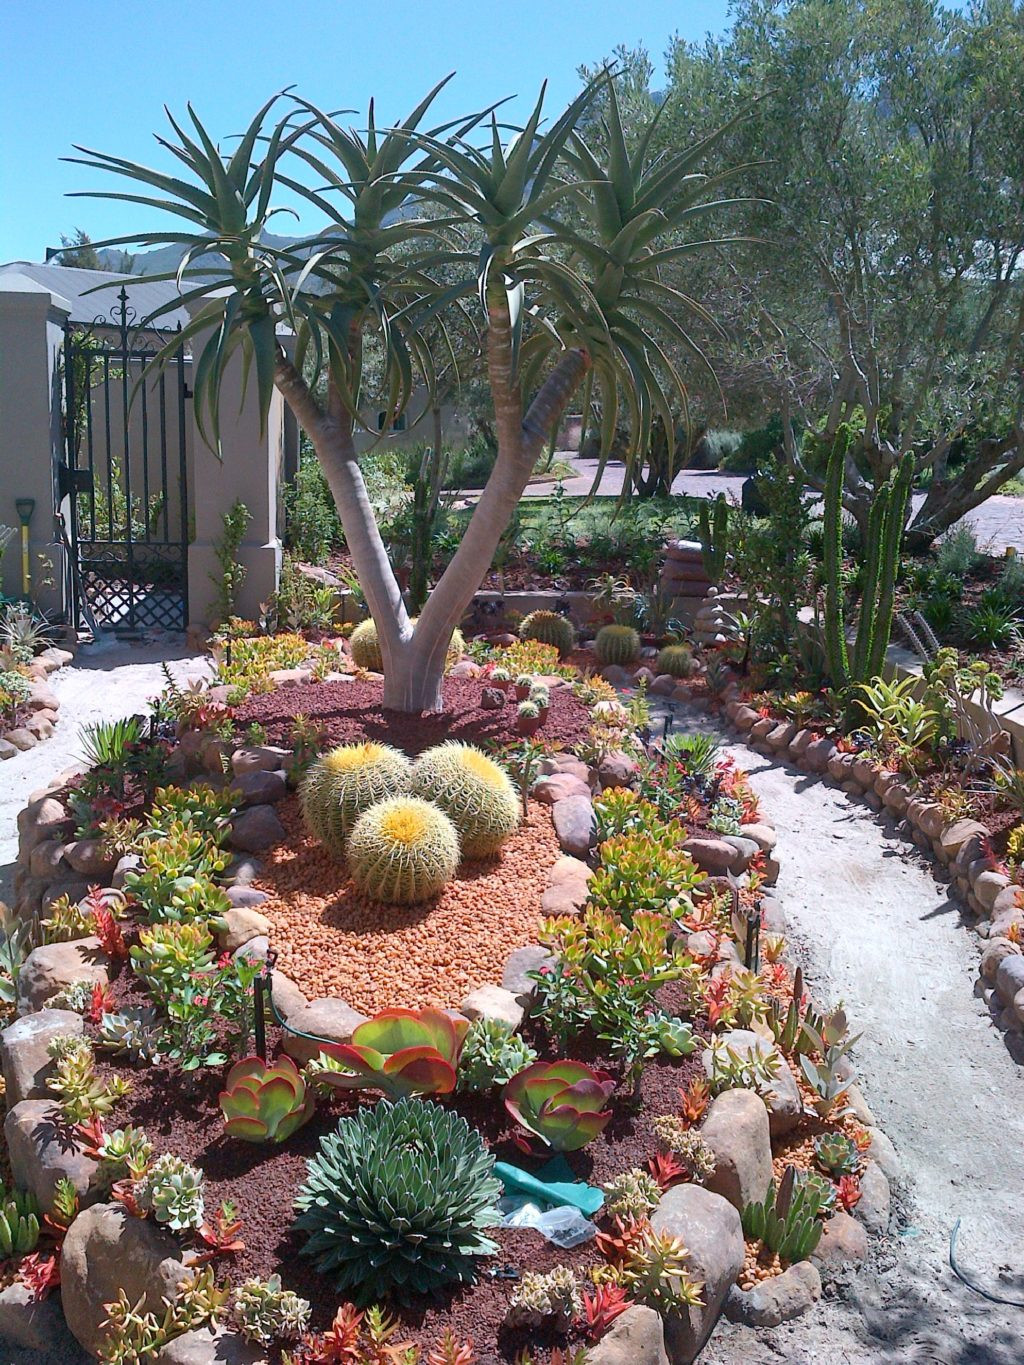 Outdoor Landscape Desert
 Get the Oasis for Your Home with These Amazing Desert